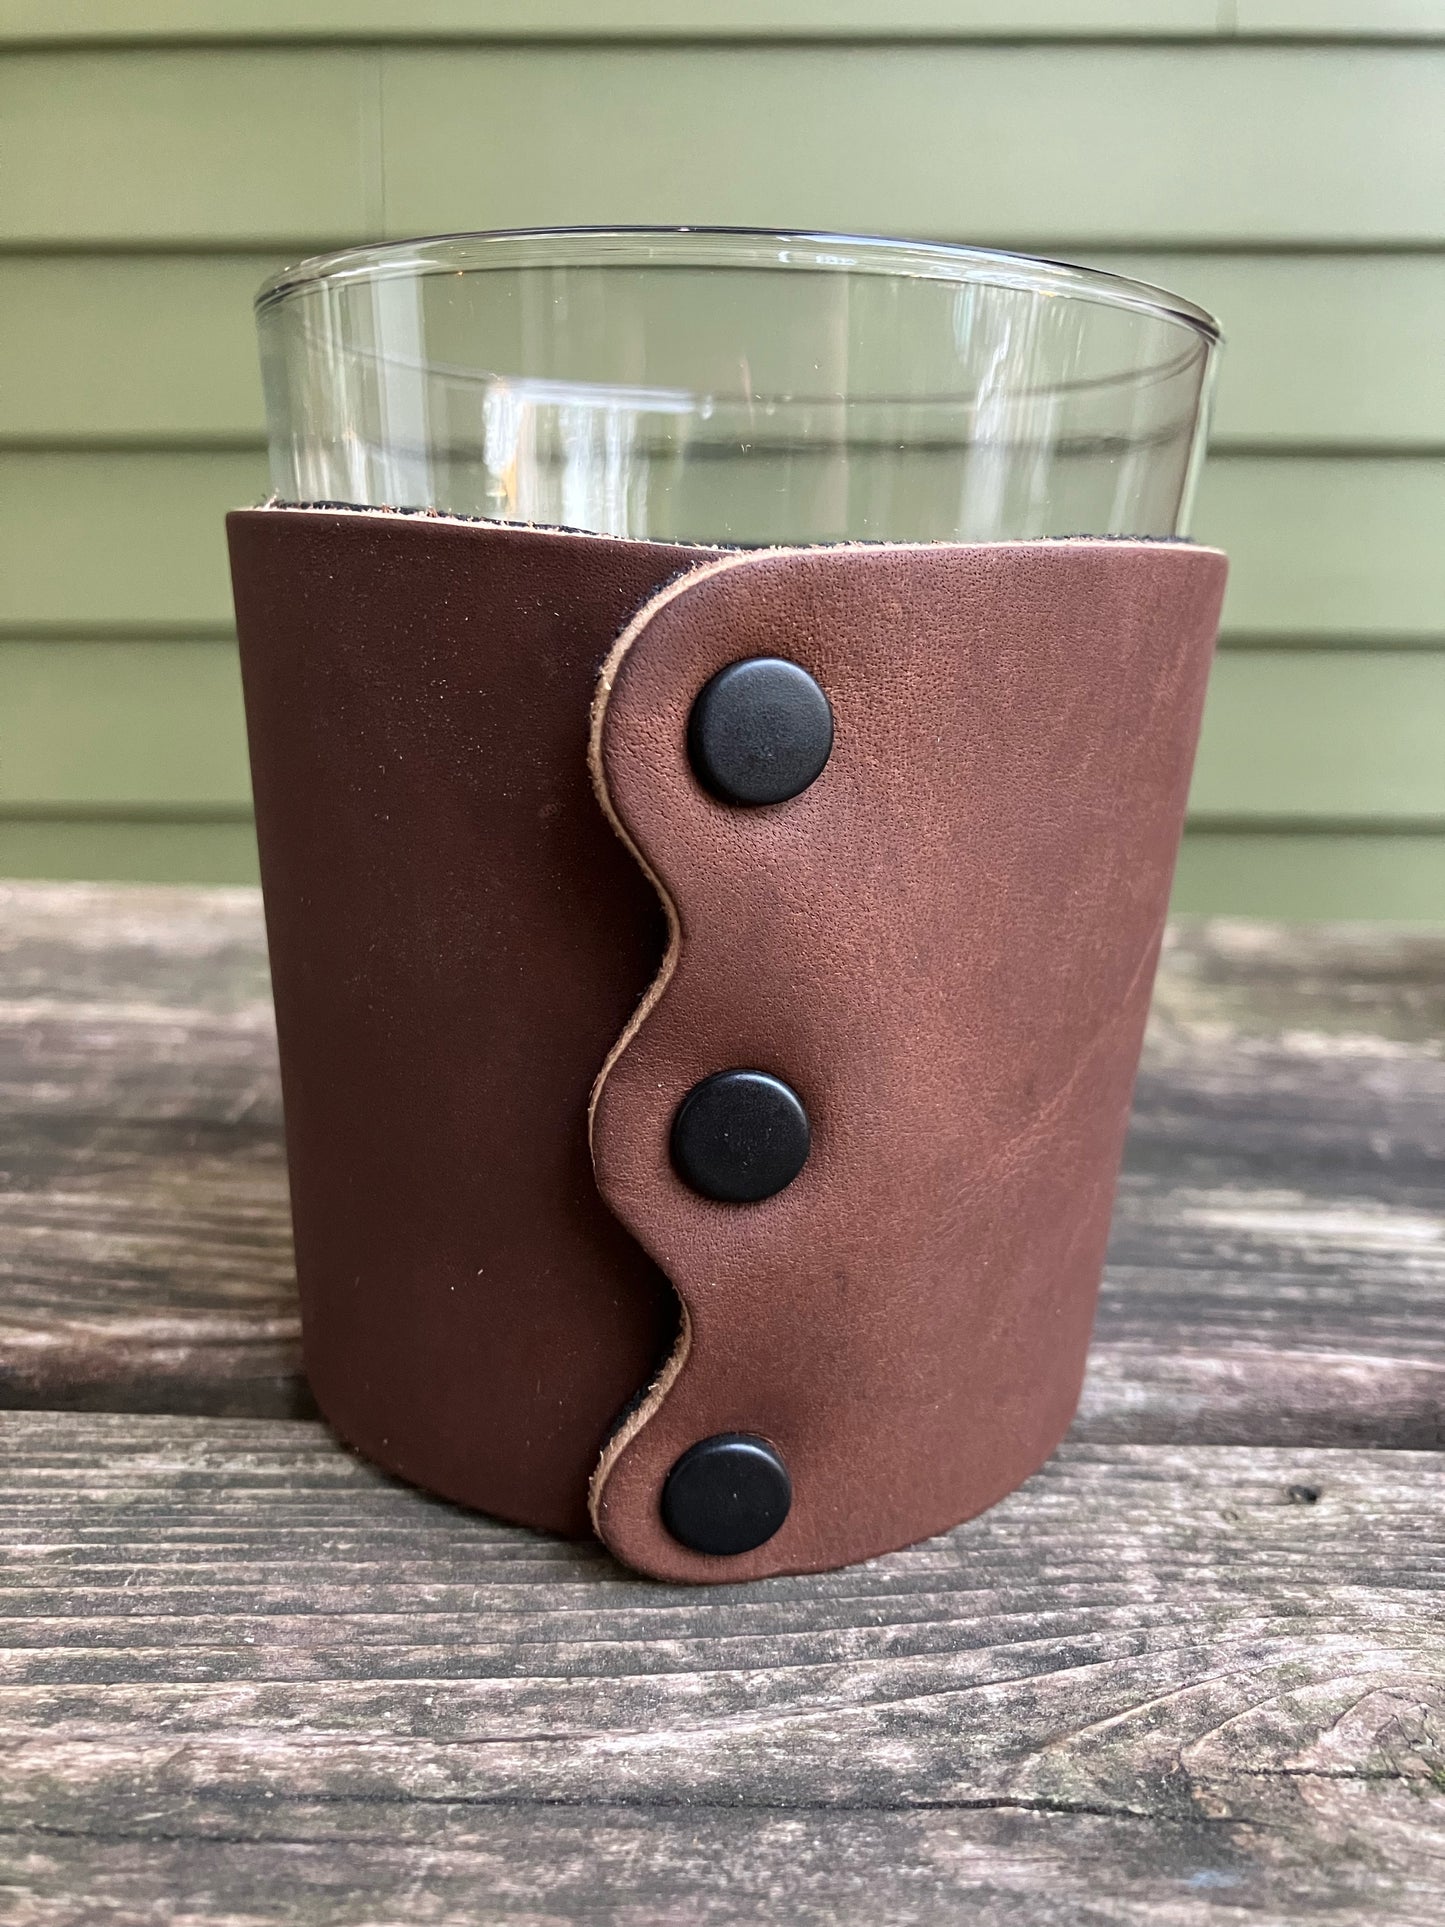 Leather Wrapped Whiskey Glass - Nantucket